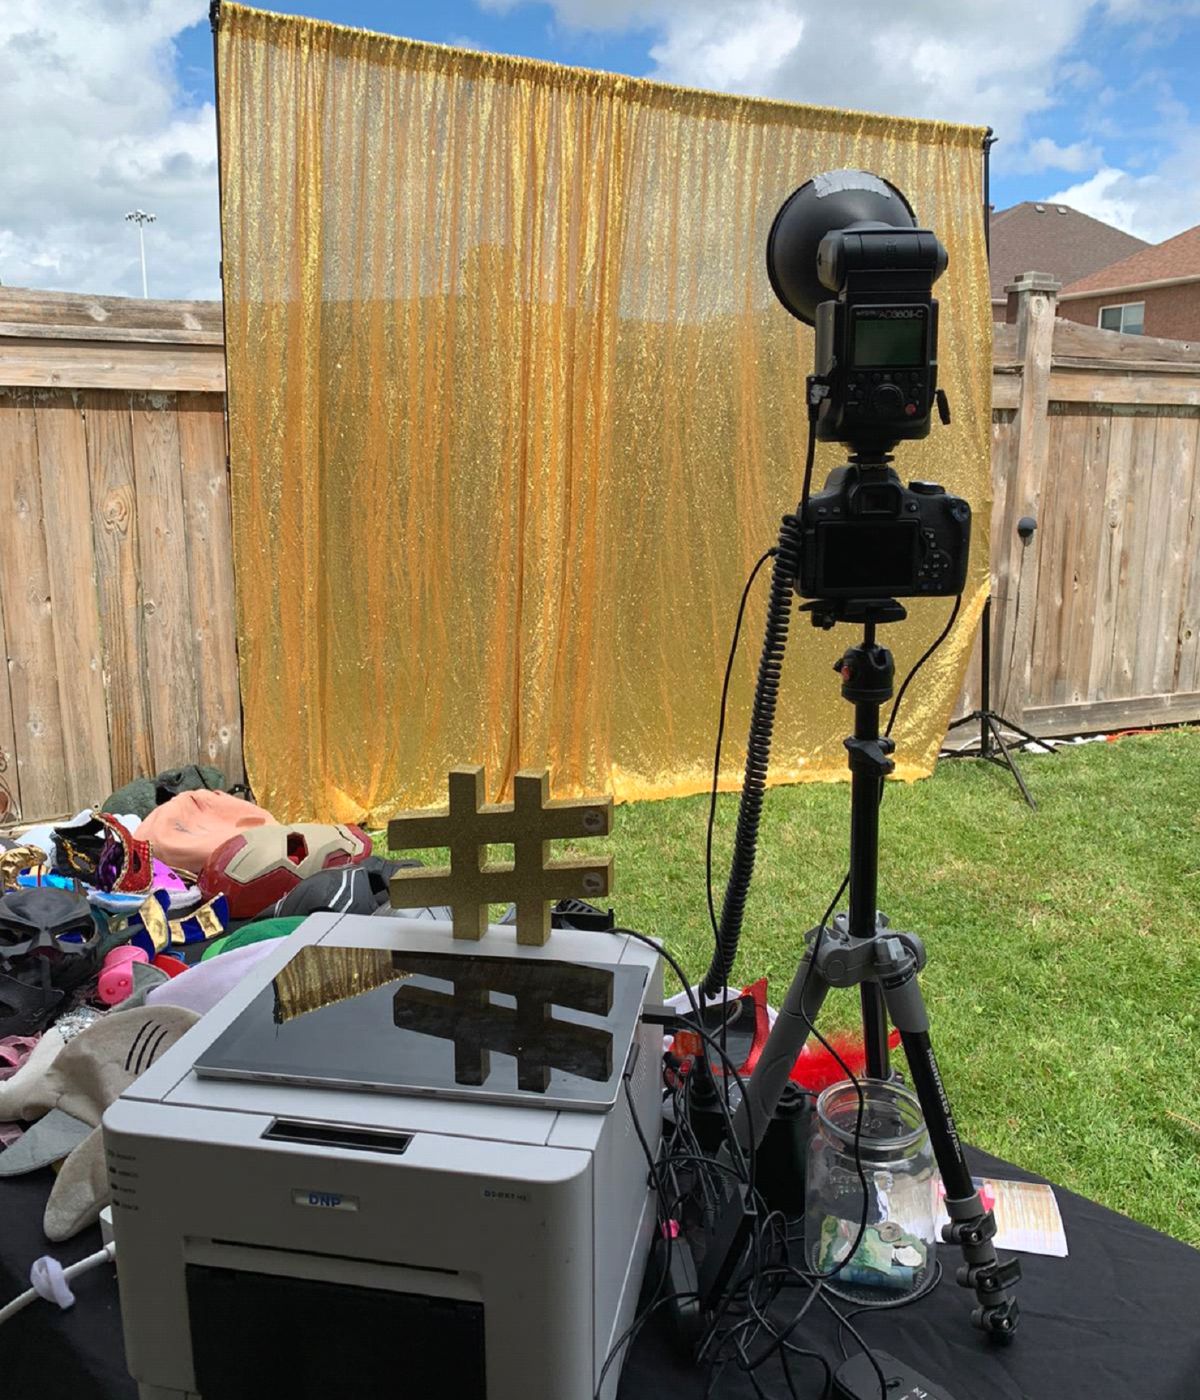 Open-Air Photo Booth Rental Features